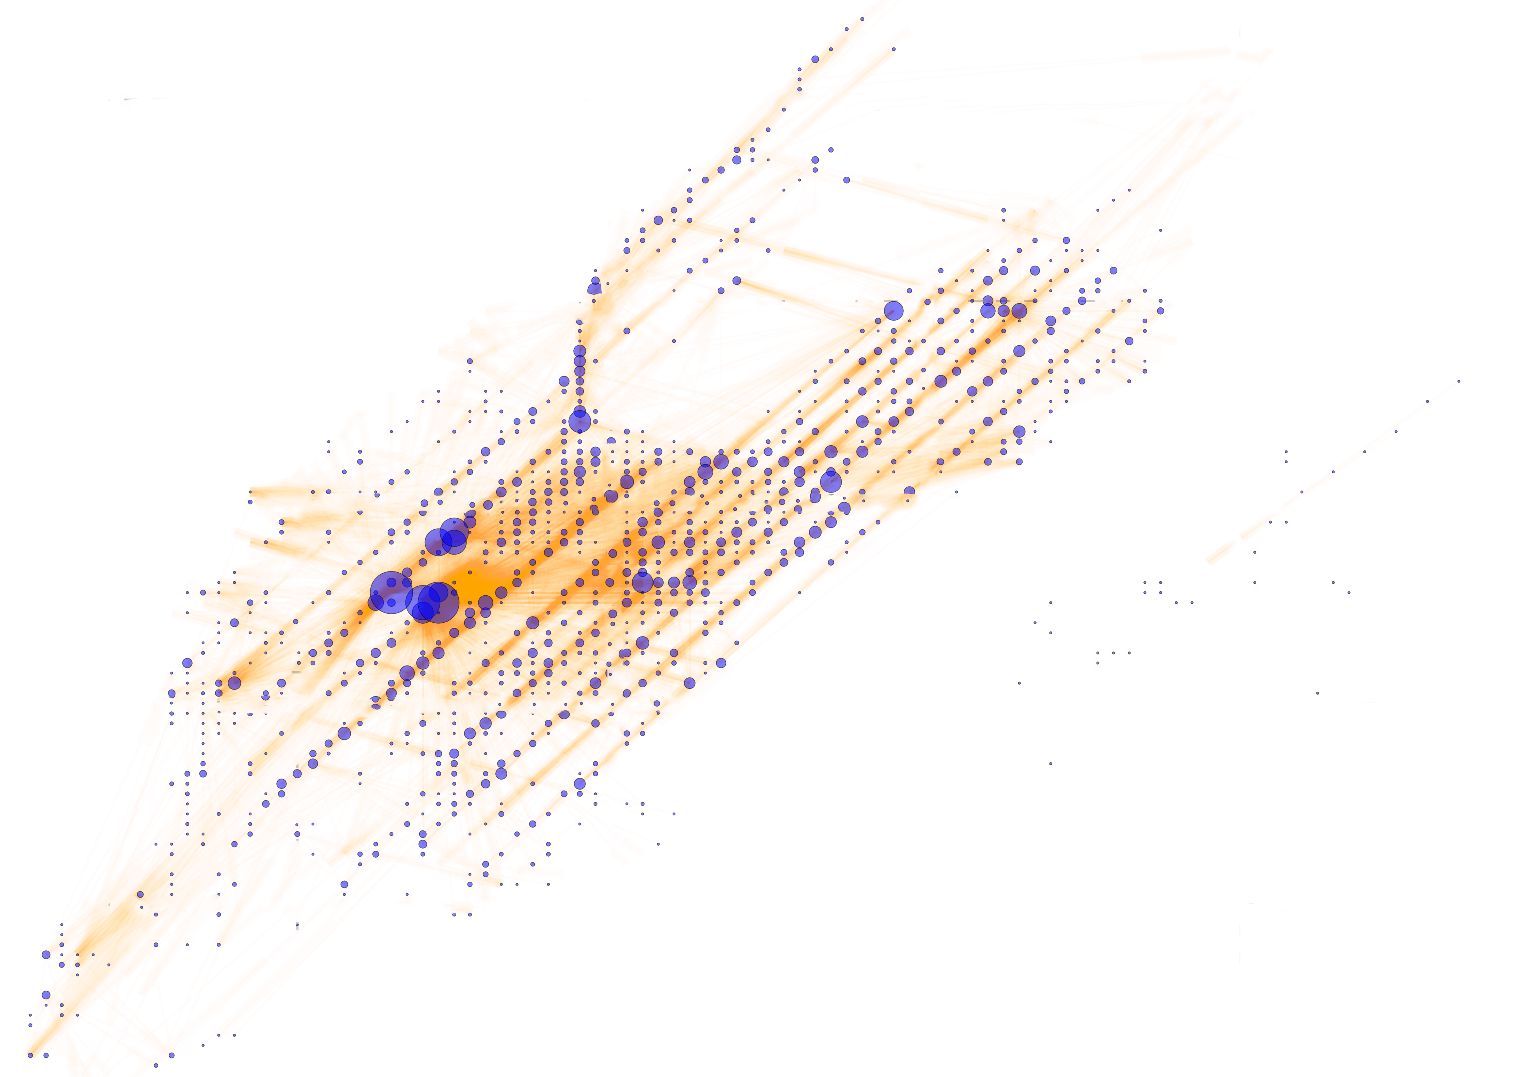 Characterizing & analyzing networks : NYC taxi data